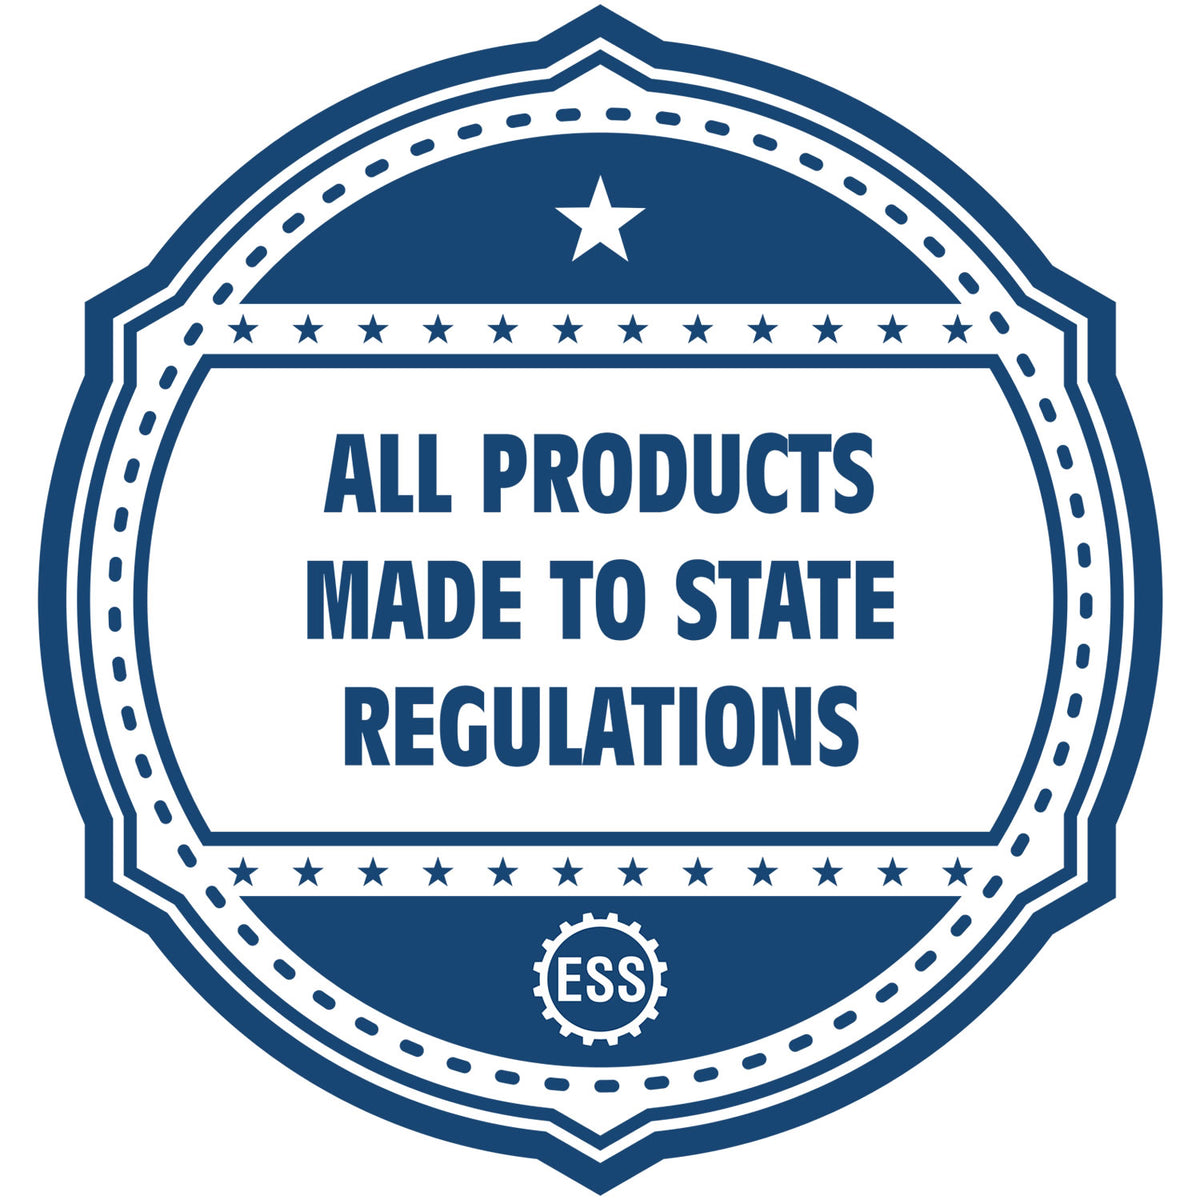 An icon or badge element for the PSI Wyoming Notary Stamp showing that this product is made in compliance with state regulations.